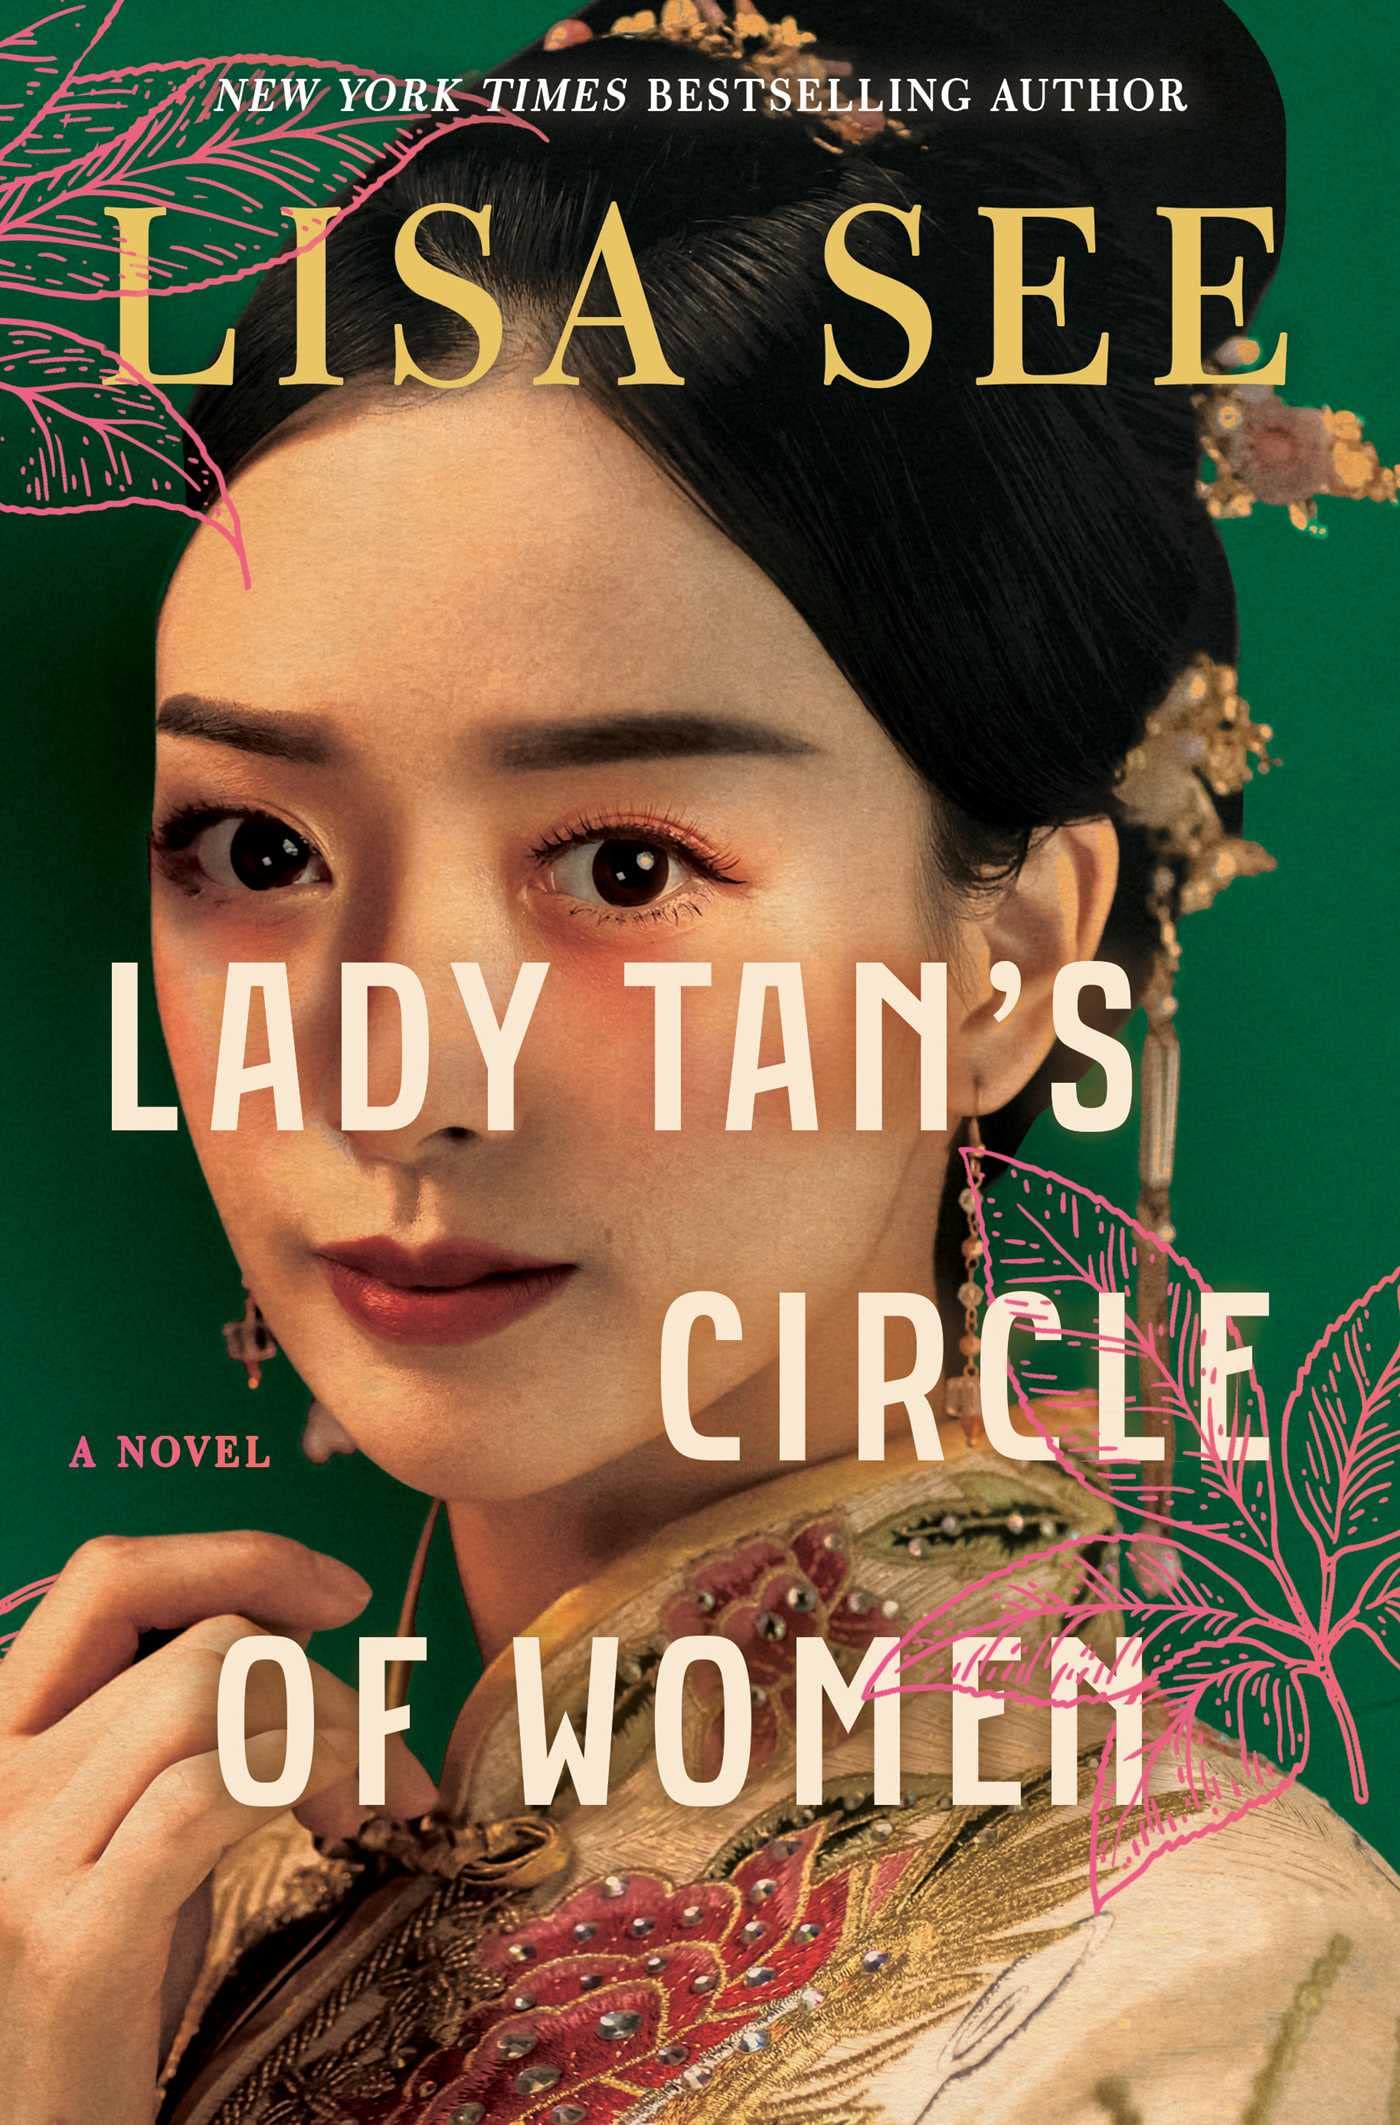 Image for "Lady Tan's Circle of Women"